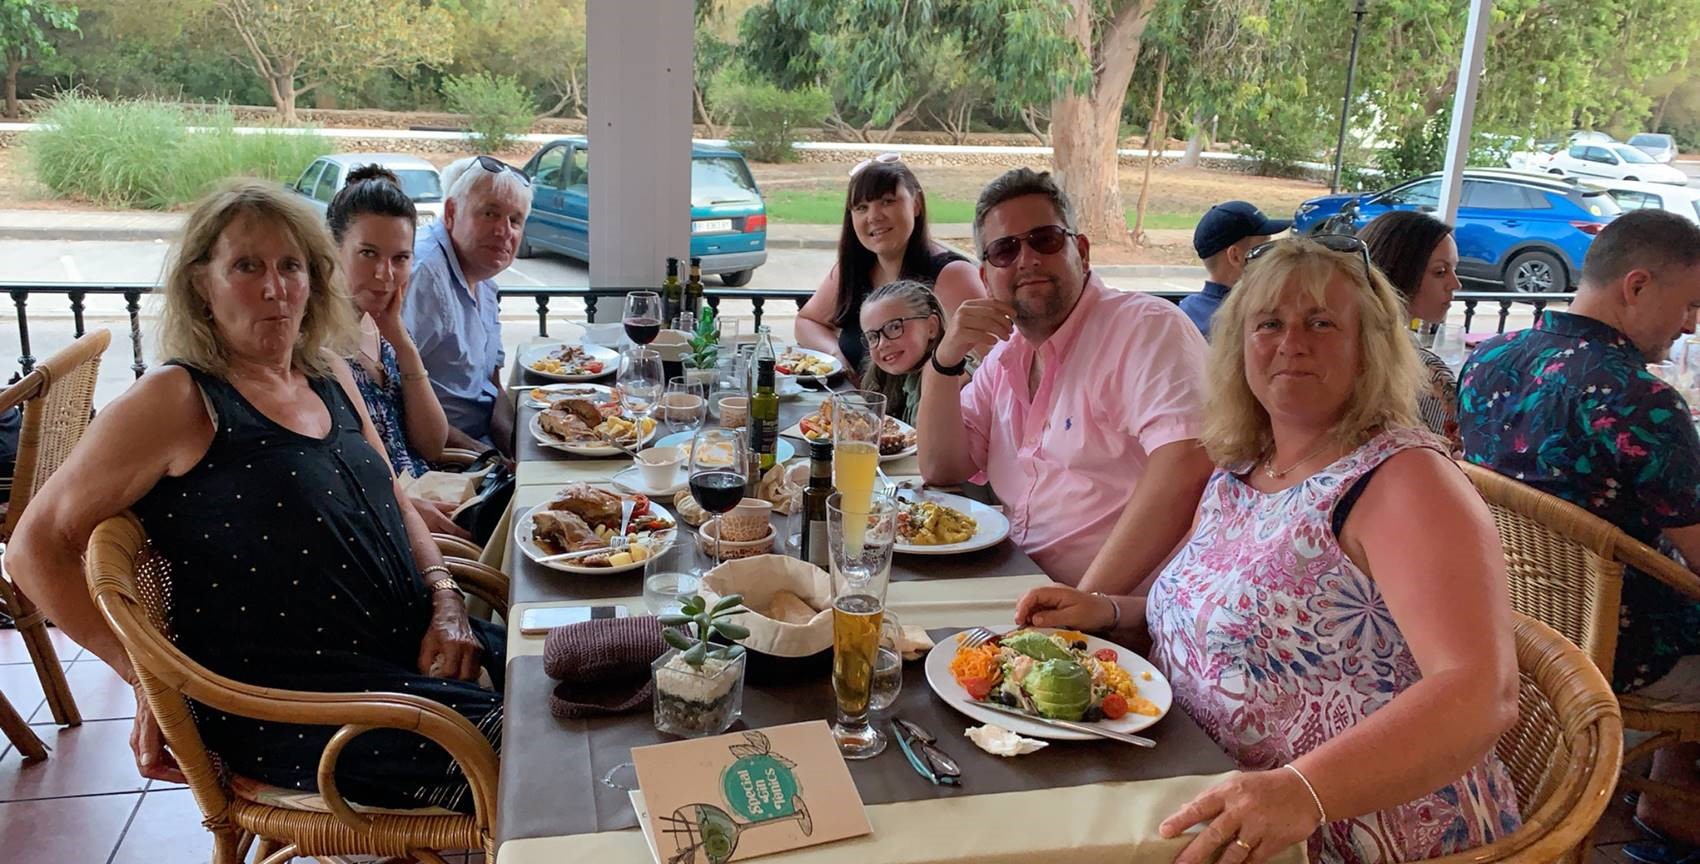 Jonny and his family enjoying a meal out in Menorca